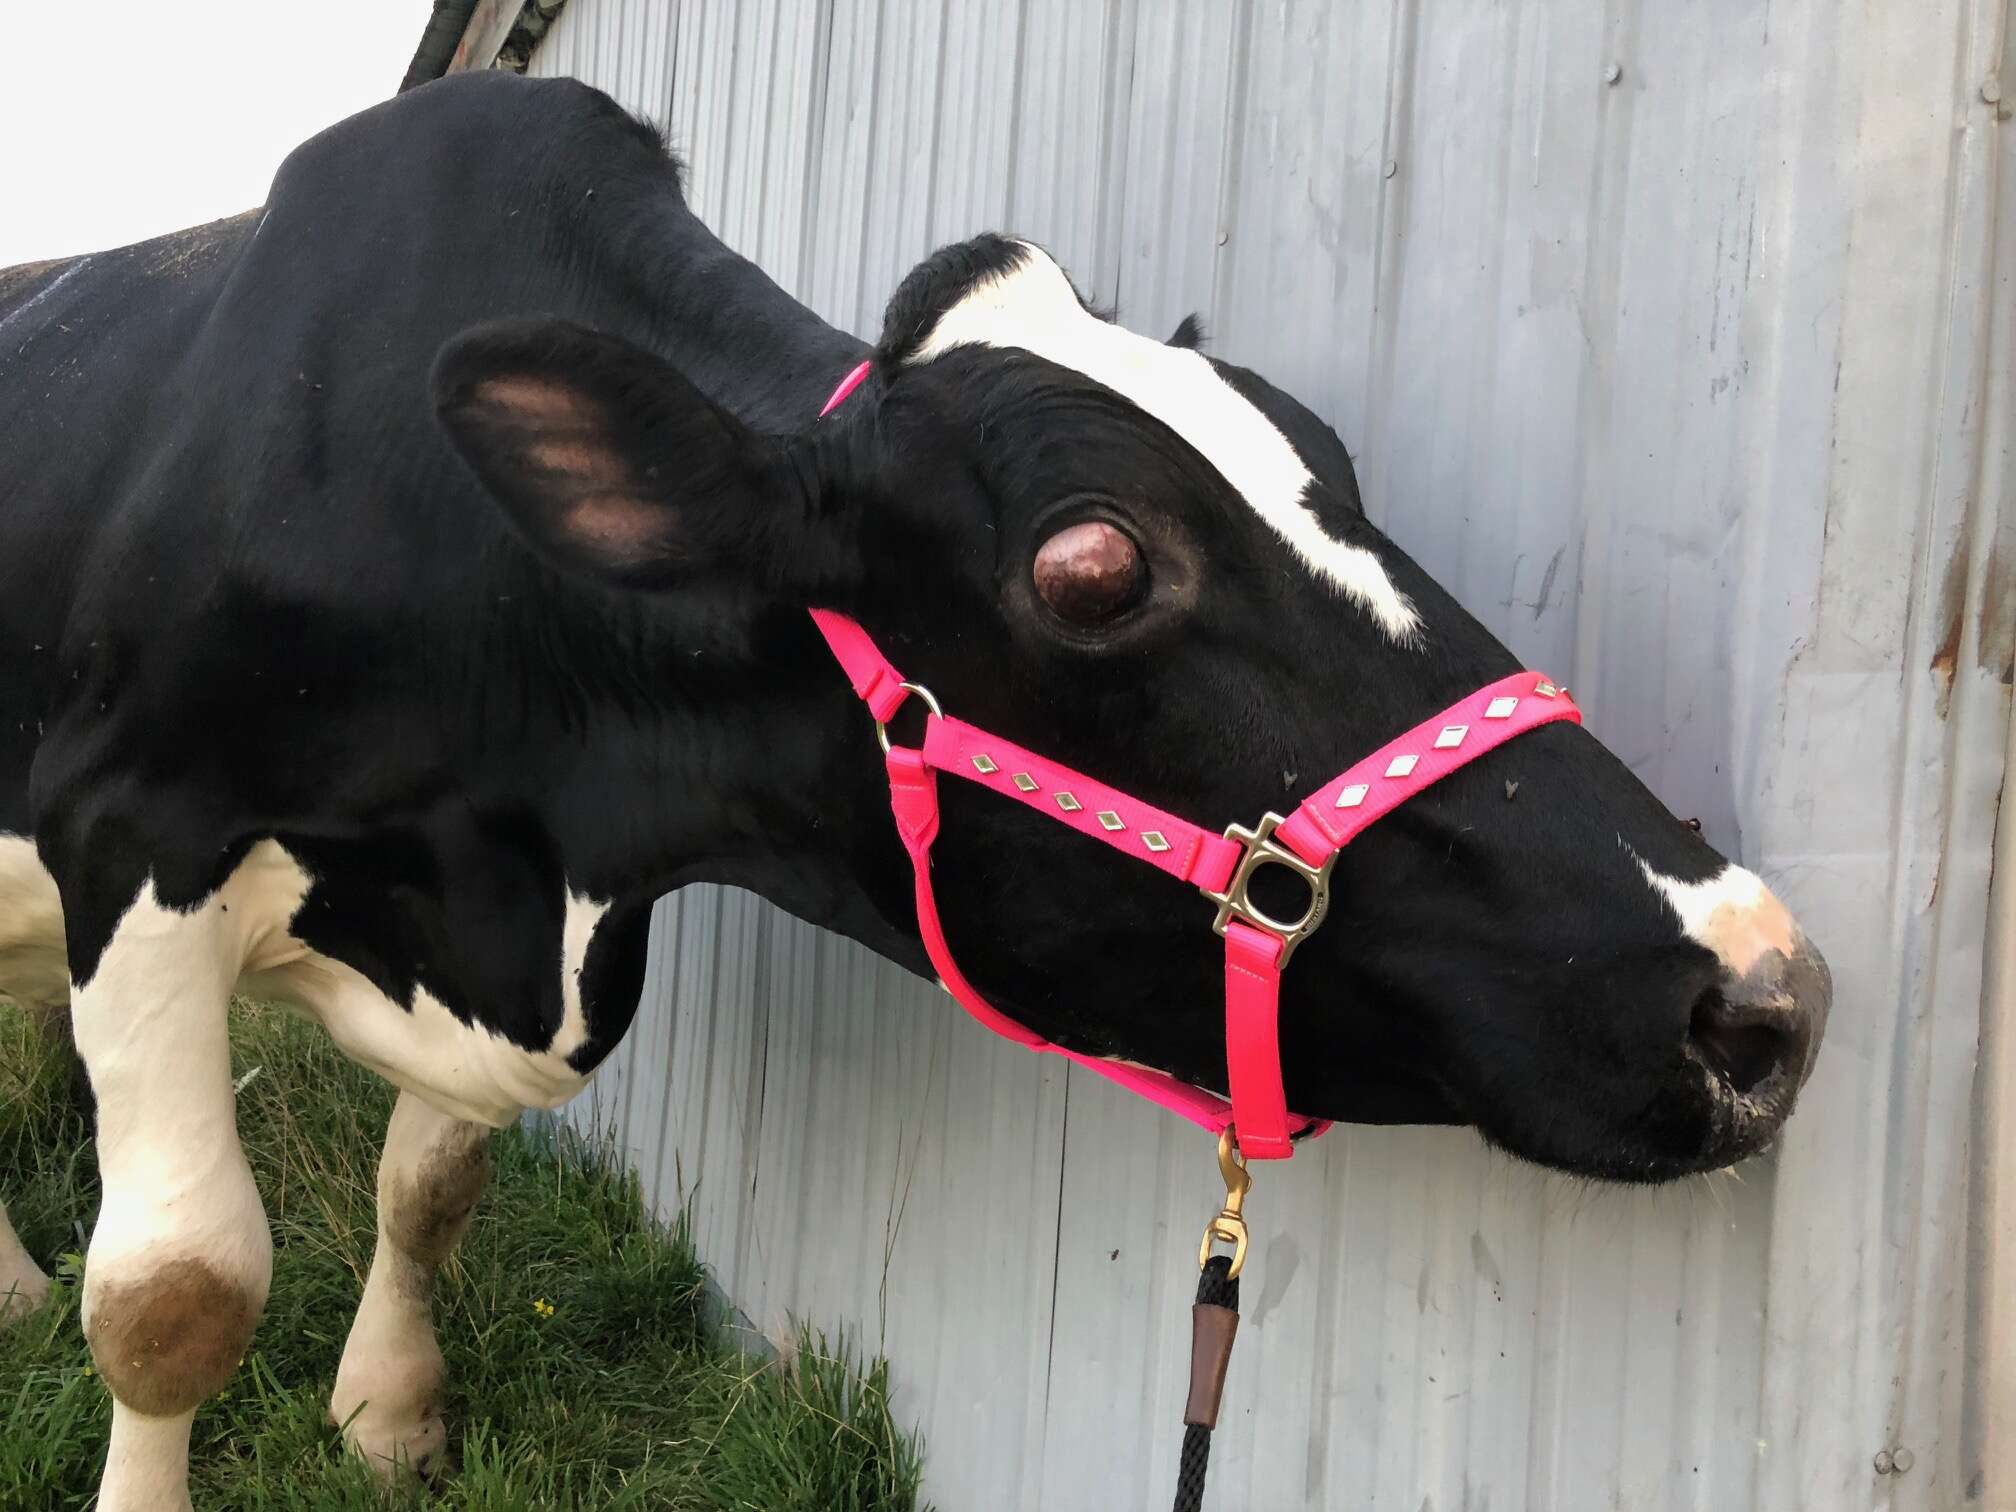 Old blind cow saved from dairy farm